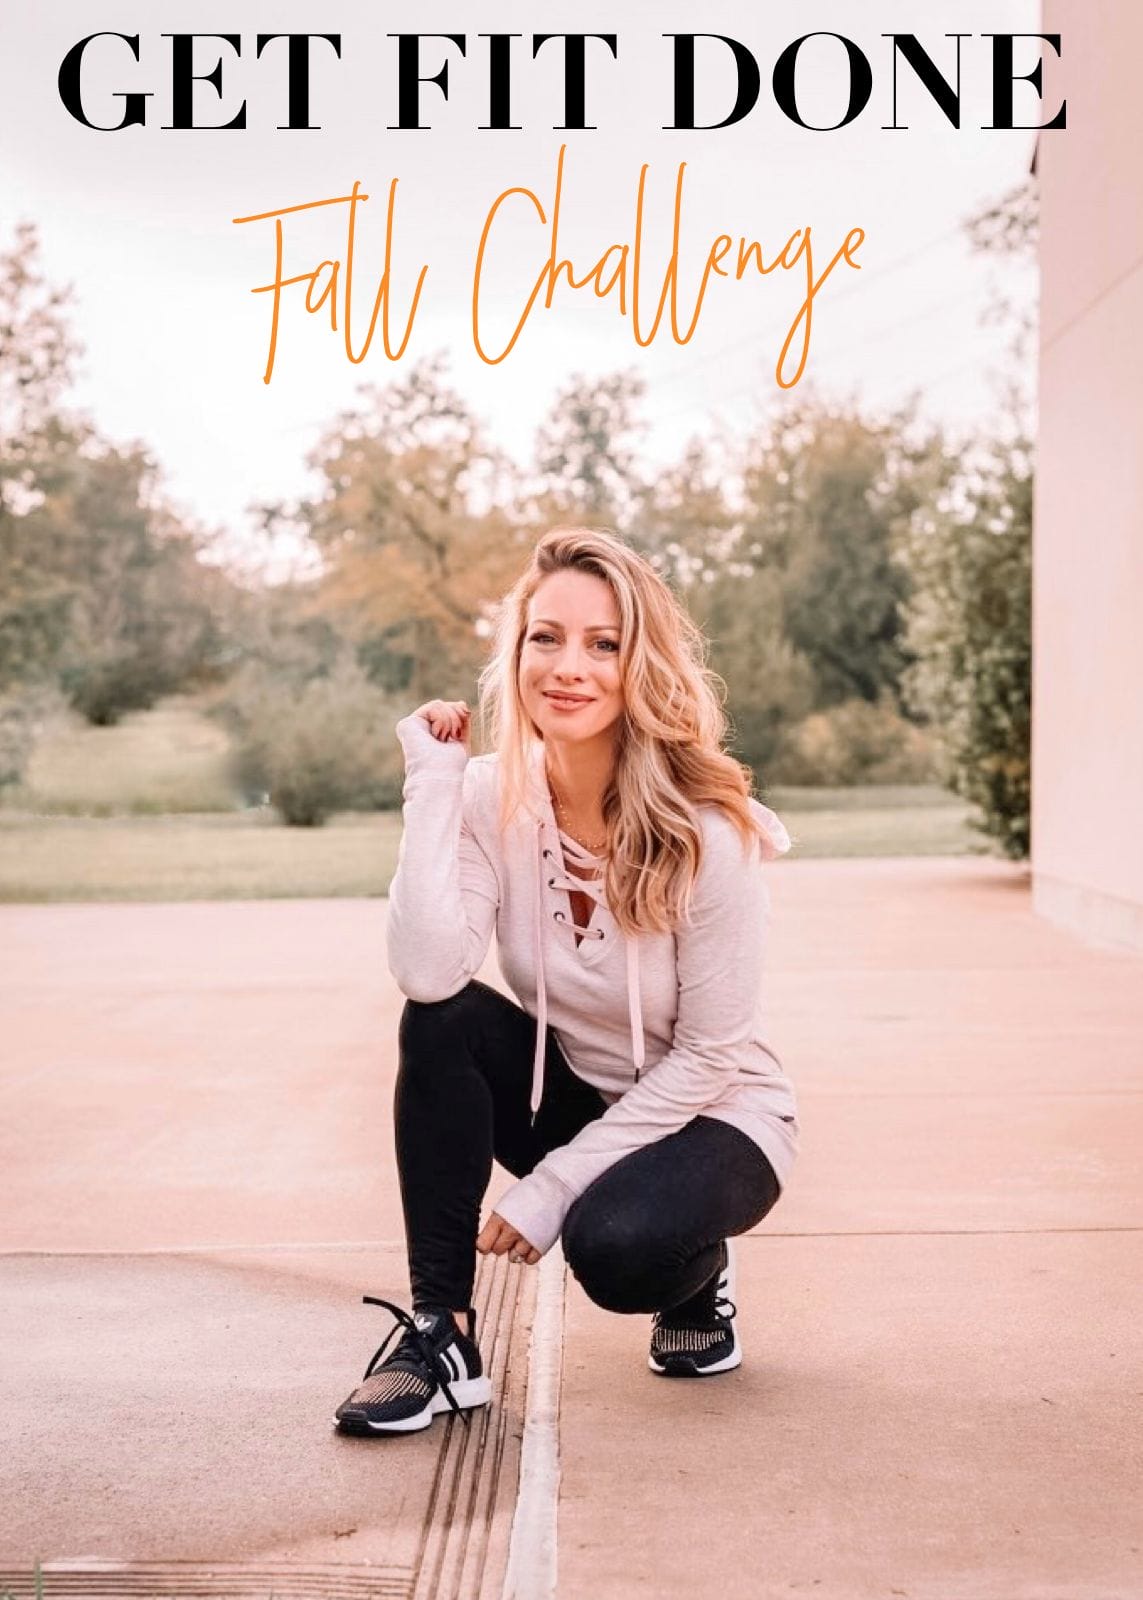 Get Fit Done Fall Challenge